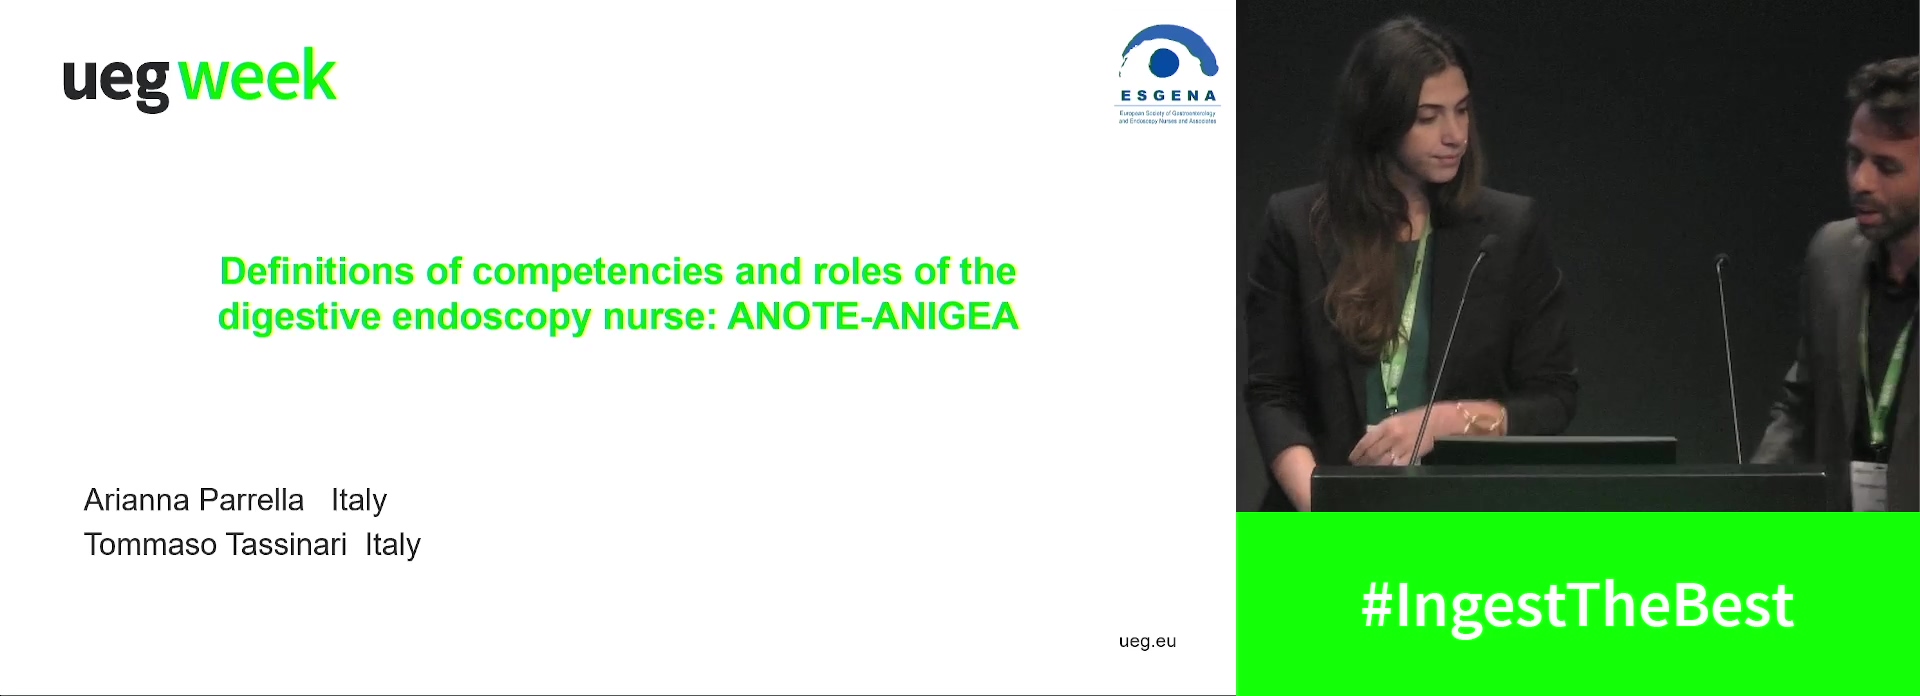 Definitions of competencies and roles of the digestive endoscopy nurse: ANOTE-ANIGEA